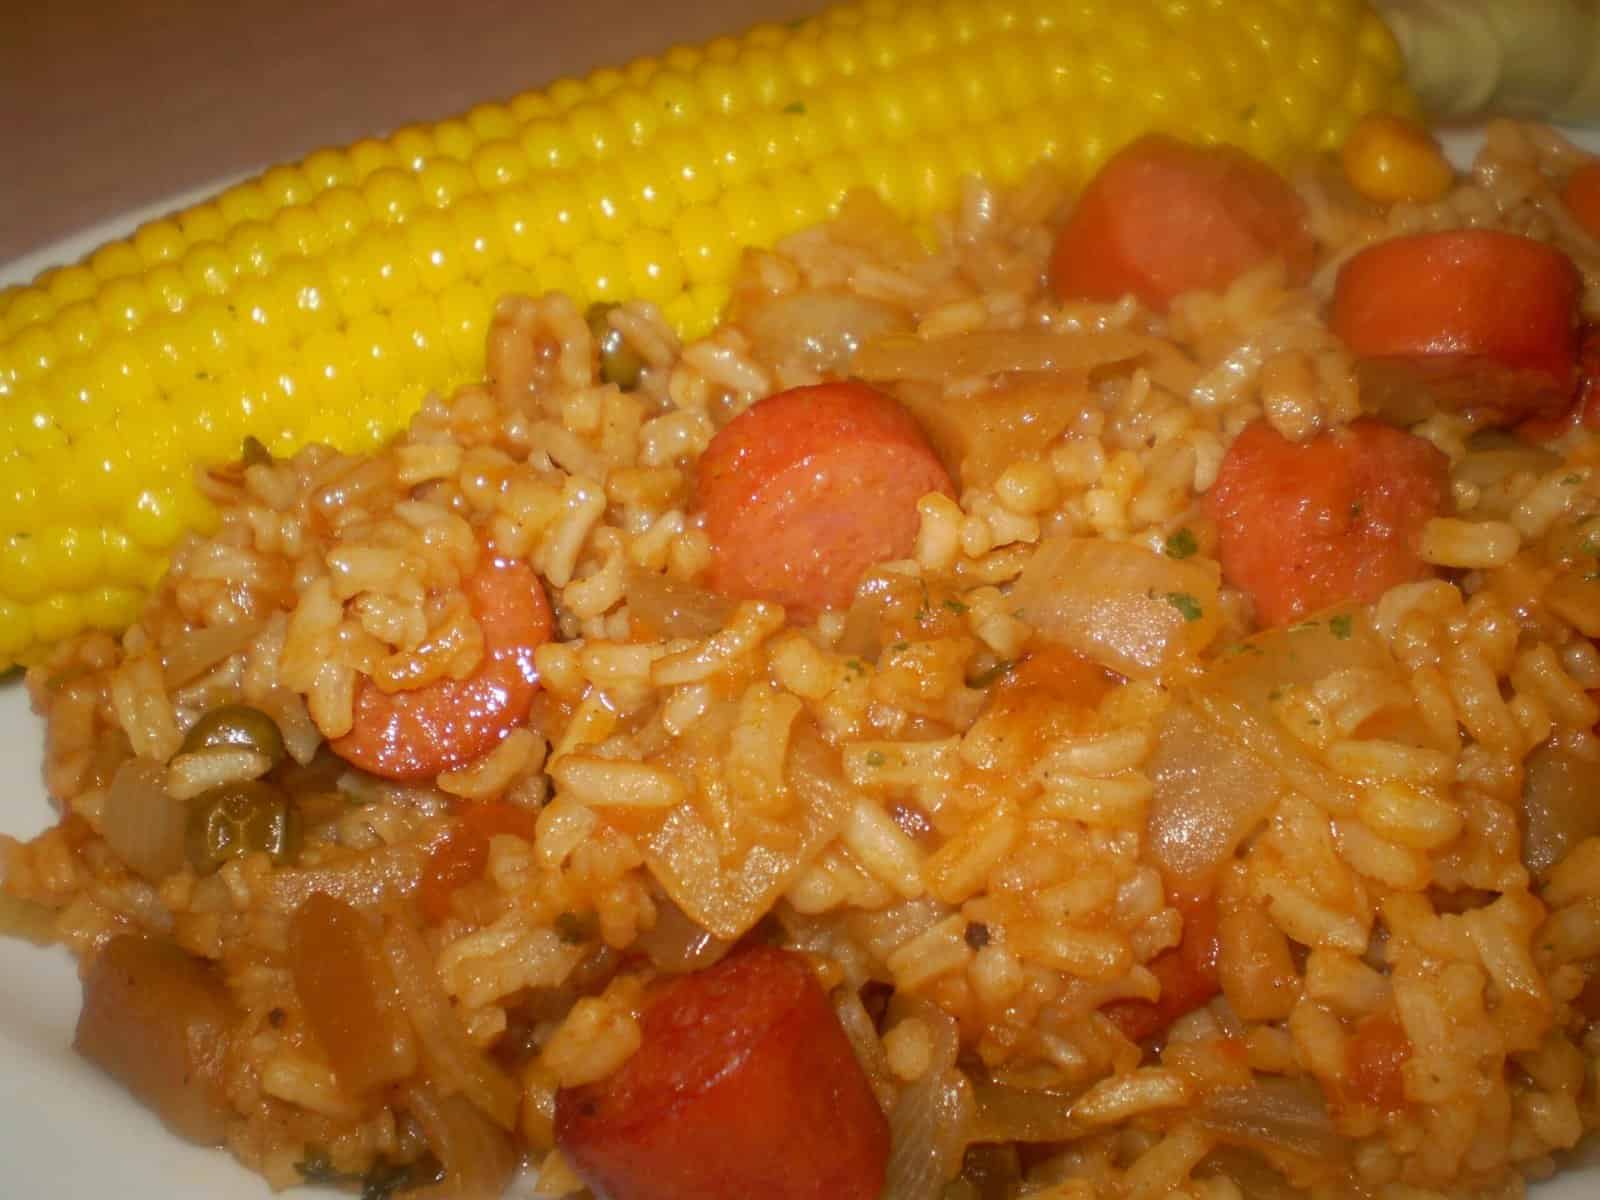 Delicious Weiner Casserole Recipe to Wow Your Guests